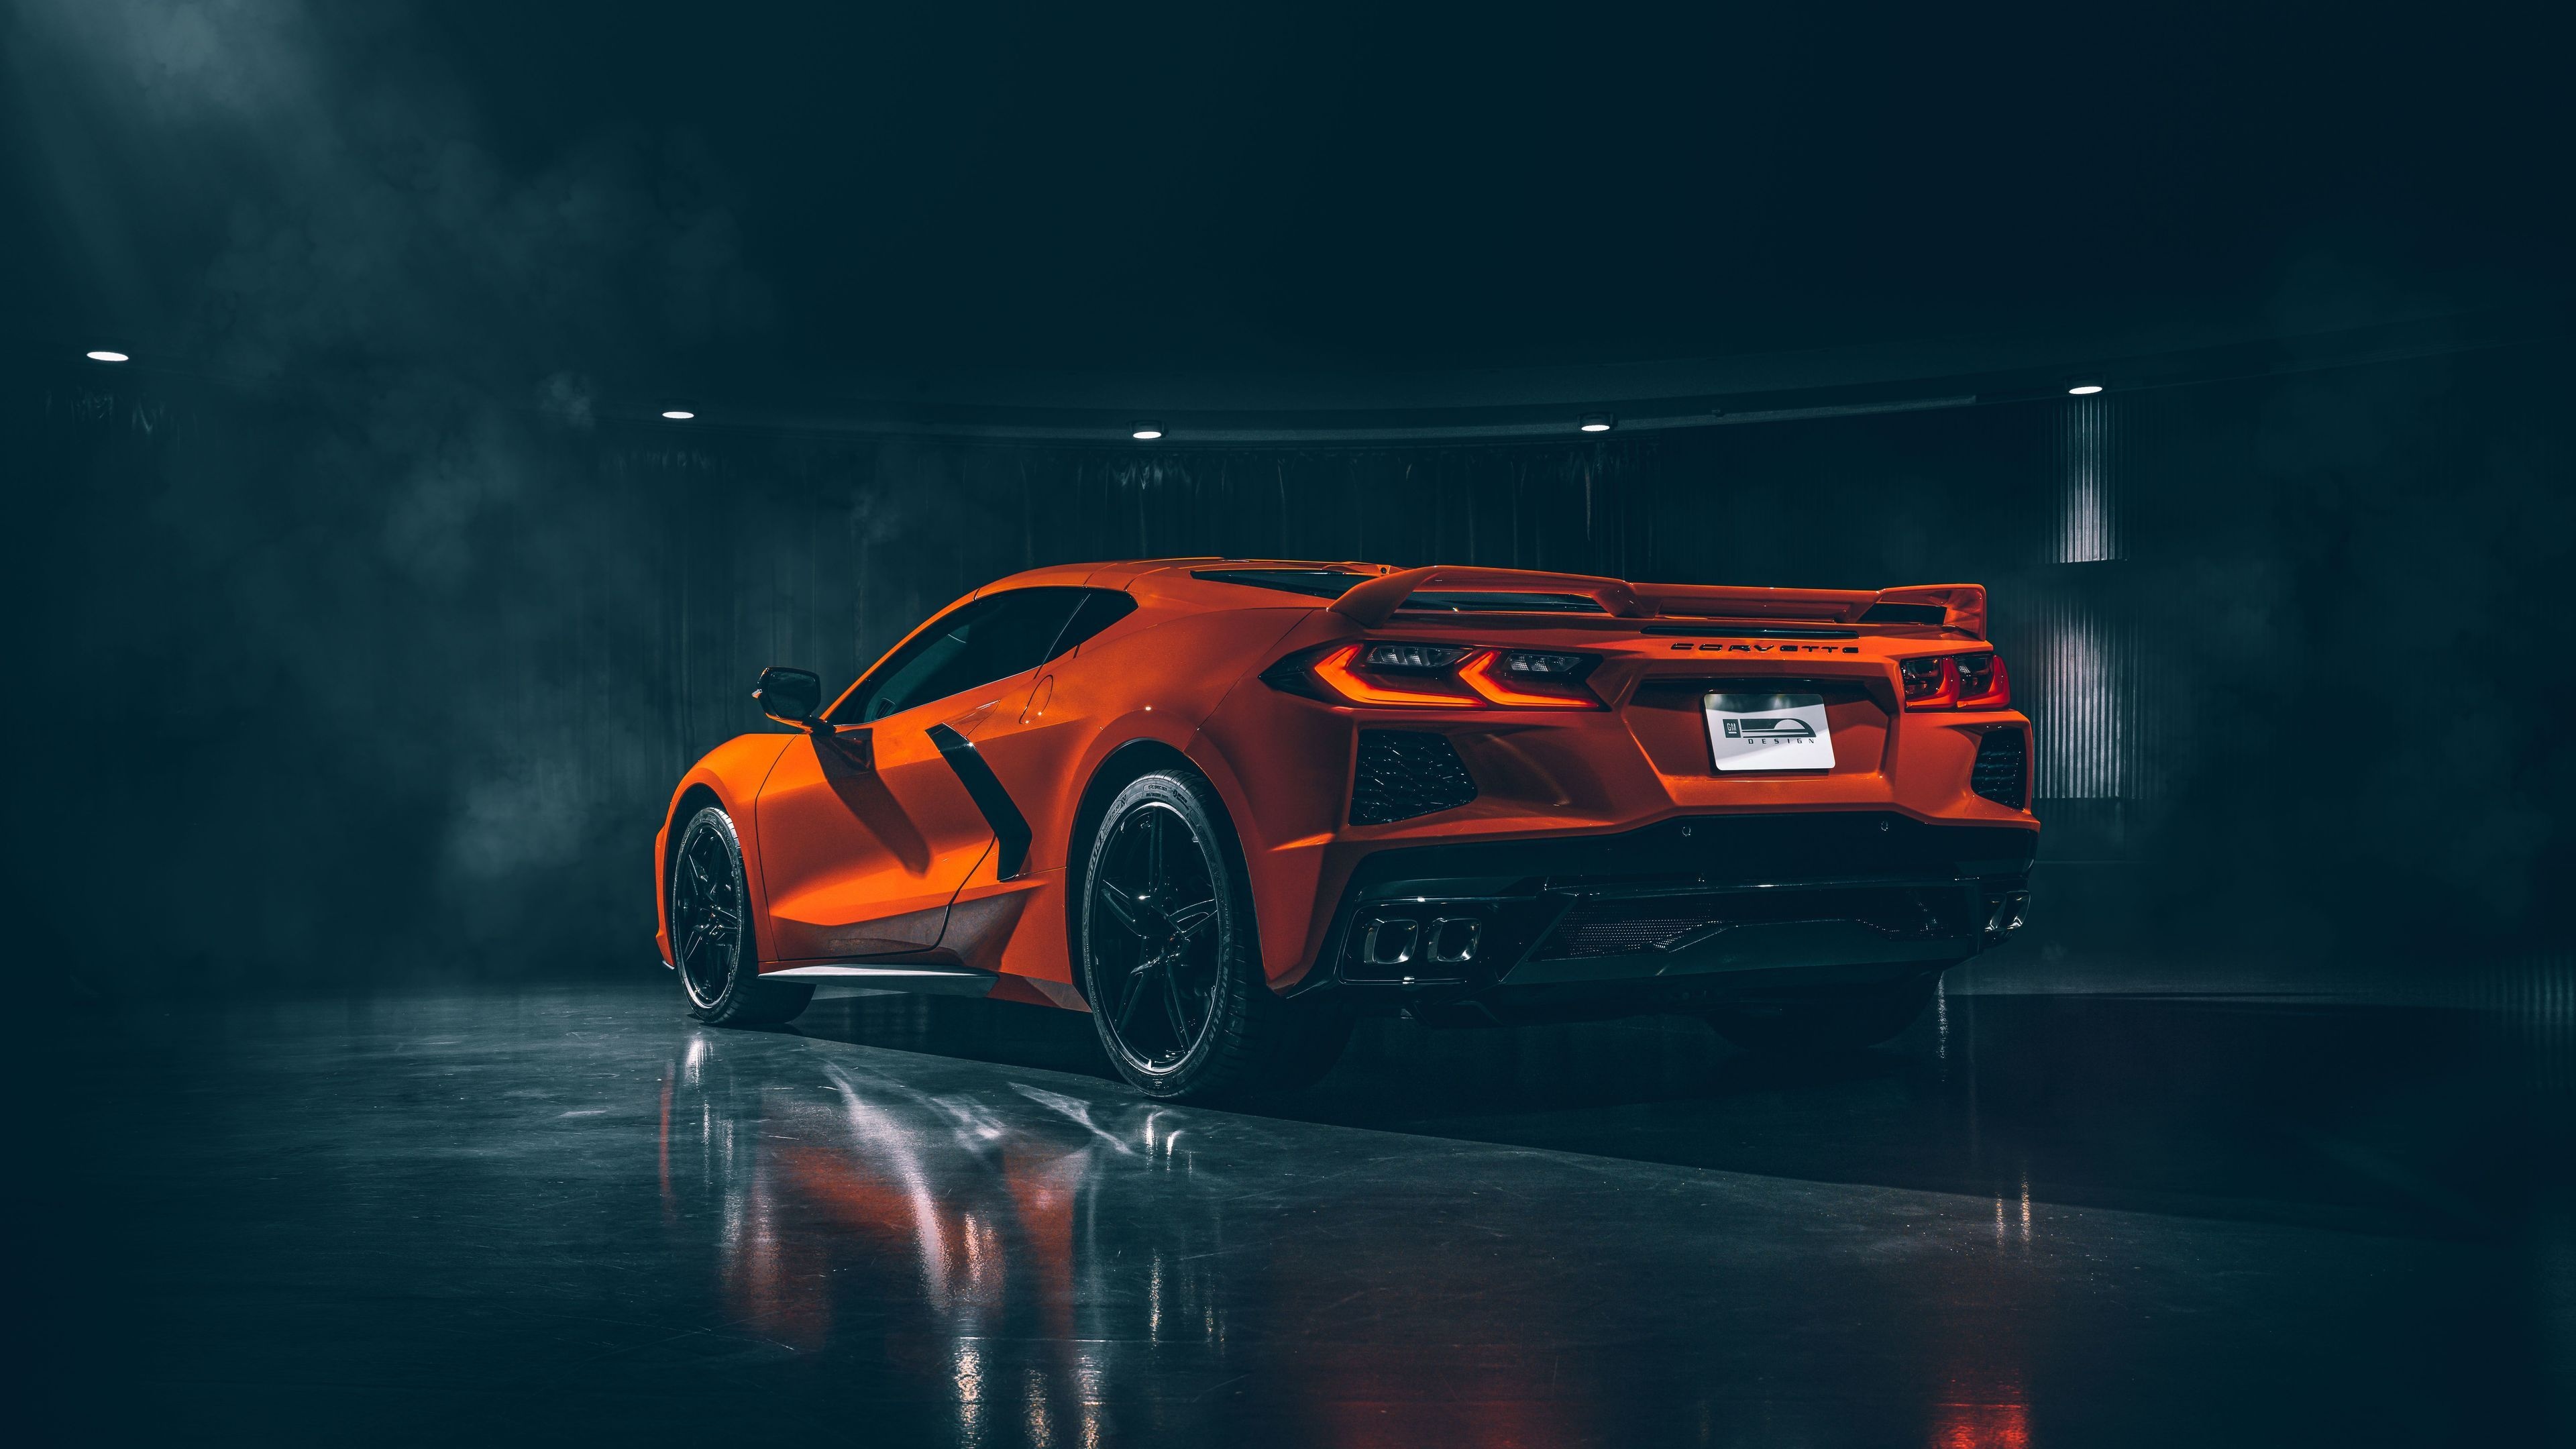 Corvette: The eighth generation C8 Stingray, LS-based GM small-block engine, High-performance car of 2020. 3840x2160 4K Background.